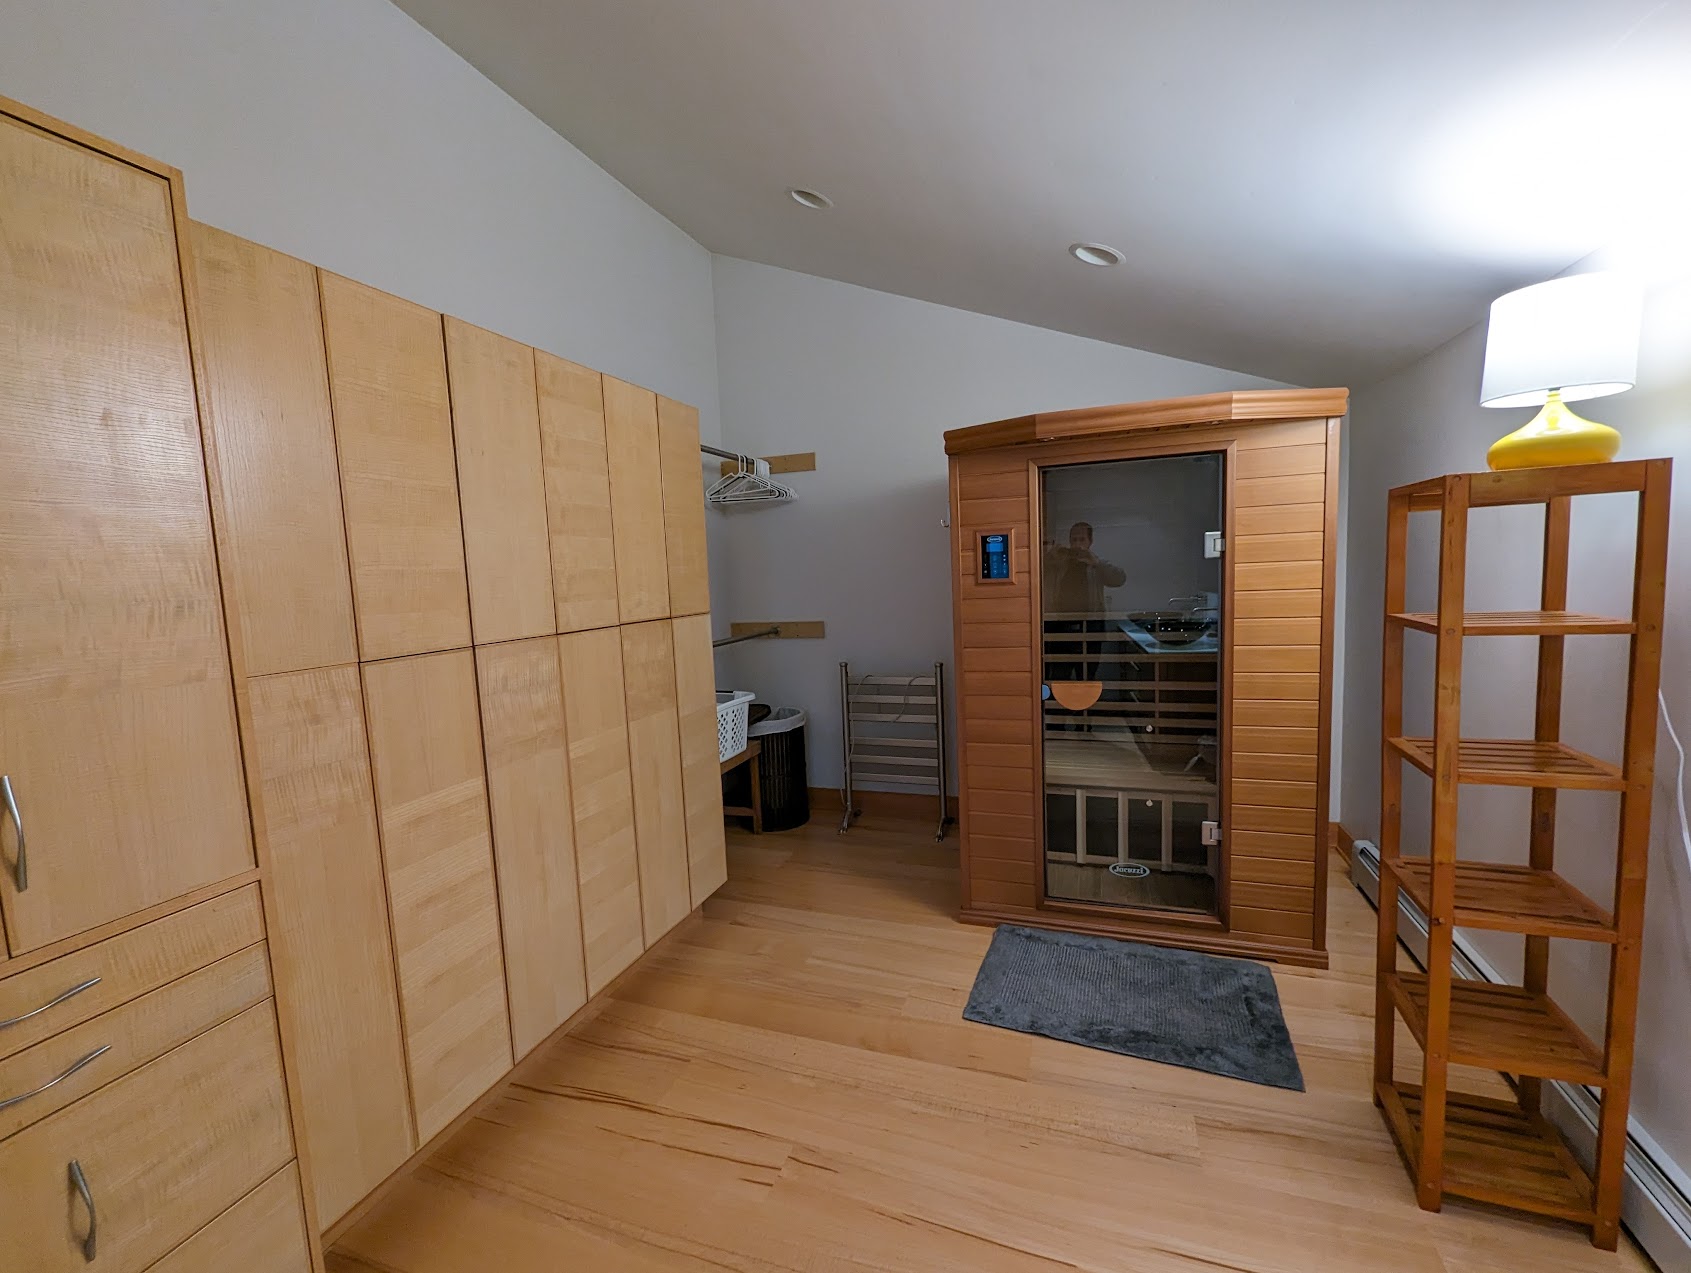 a room with a sauna and shelves